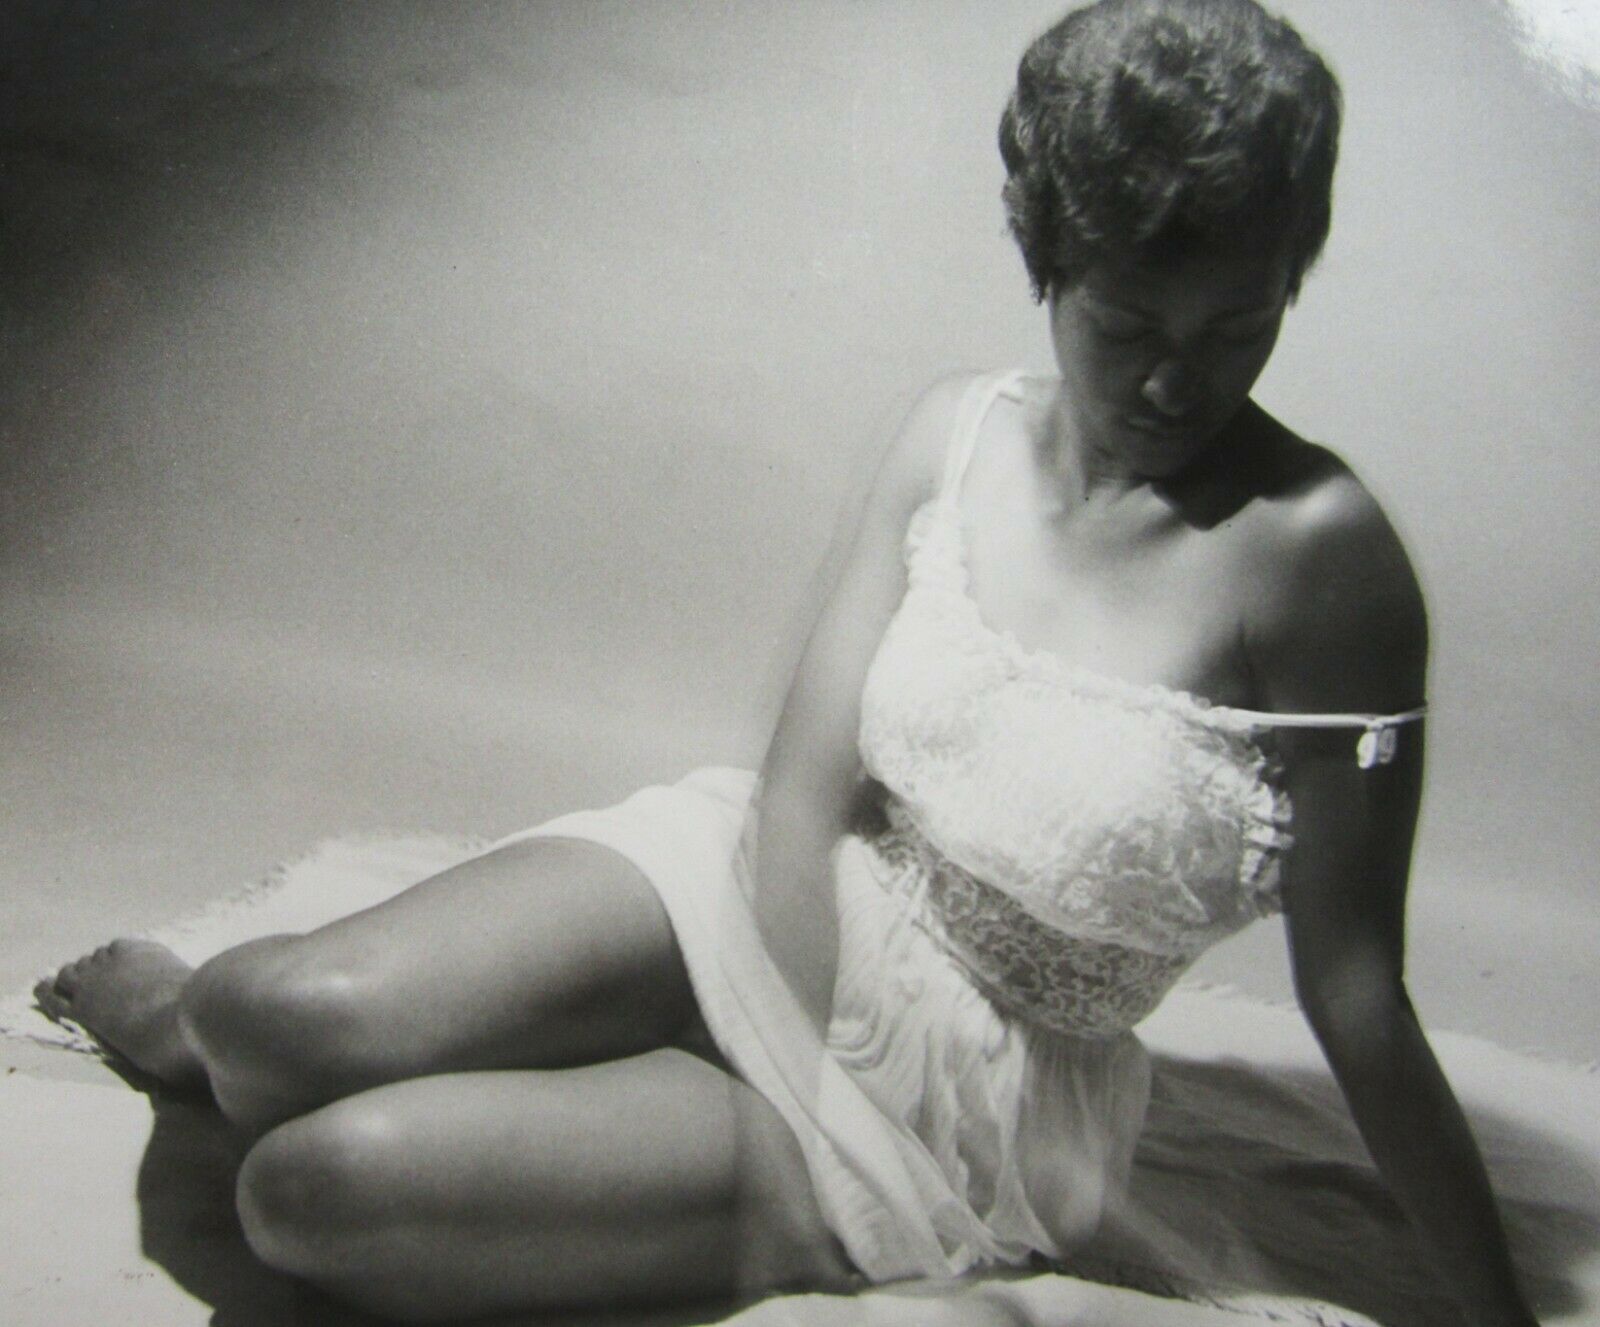 Vintage Black African American Pinup Photo Pretty Girl Lingerie Compton Ca 1950s